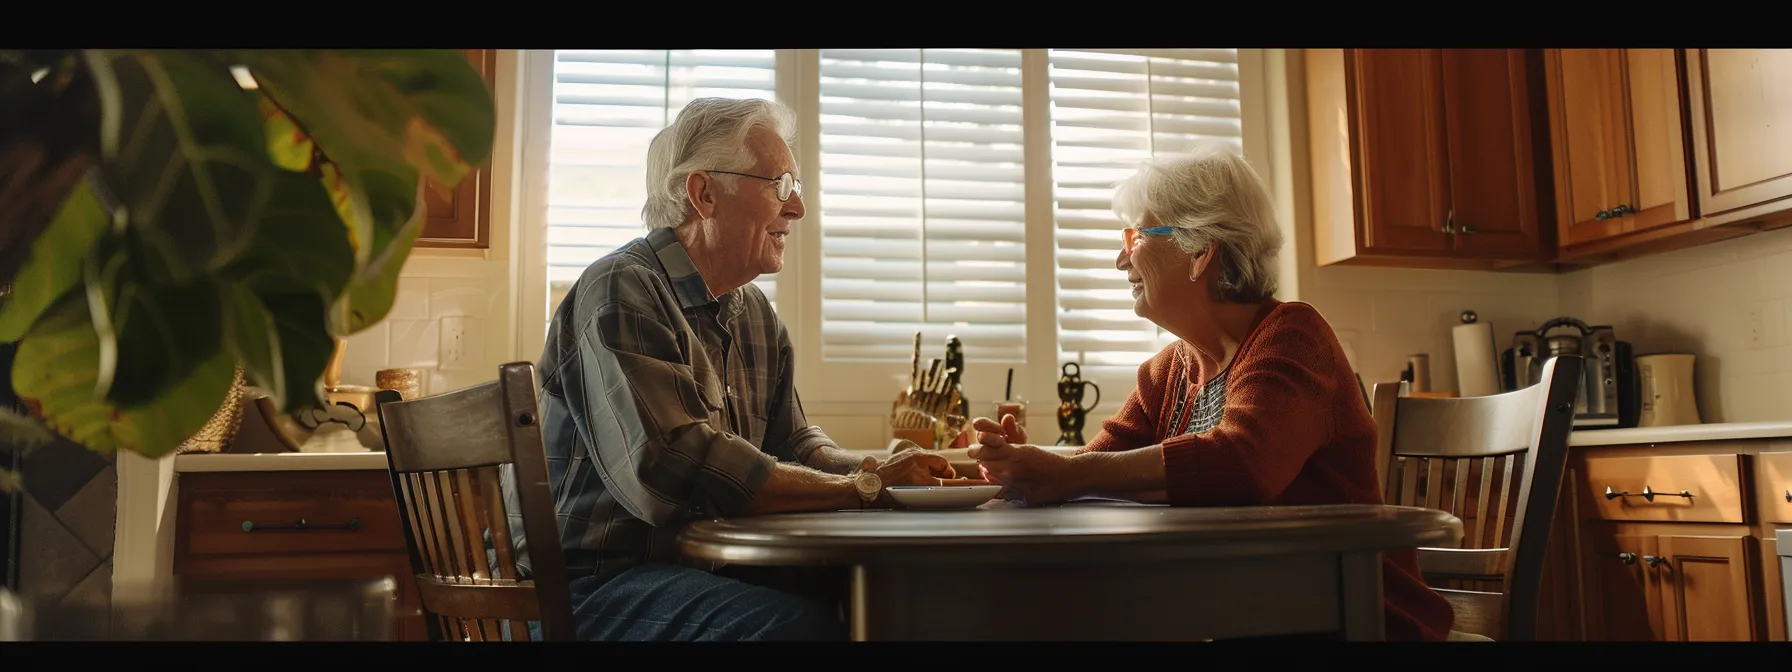 a senior couple sitting at a kitchen table in miami discussing their reverse mortgage options.